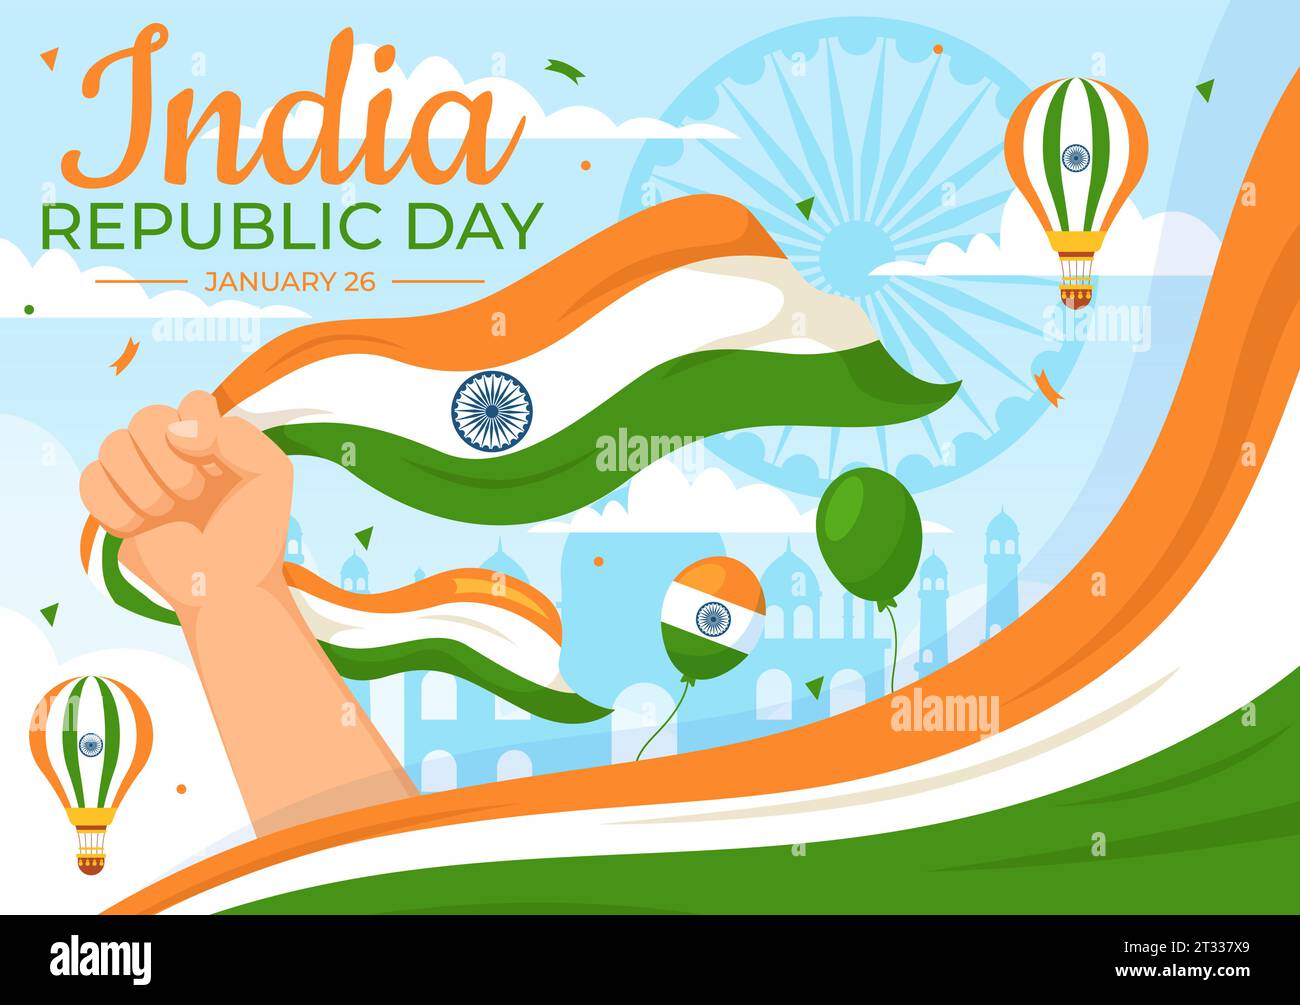 Happy India Republic Day Vector Illustration on 26 January with Indian Flag and Gate in Holiday National Celebration Flat Cartoon Background Design Stock Vector